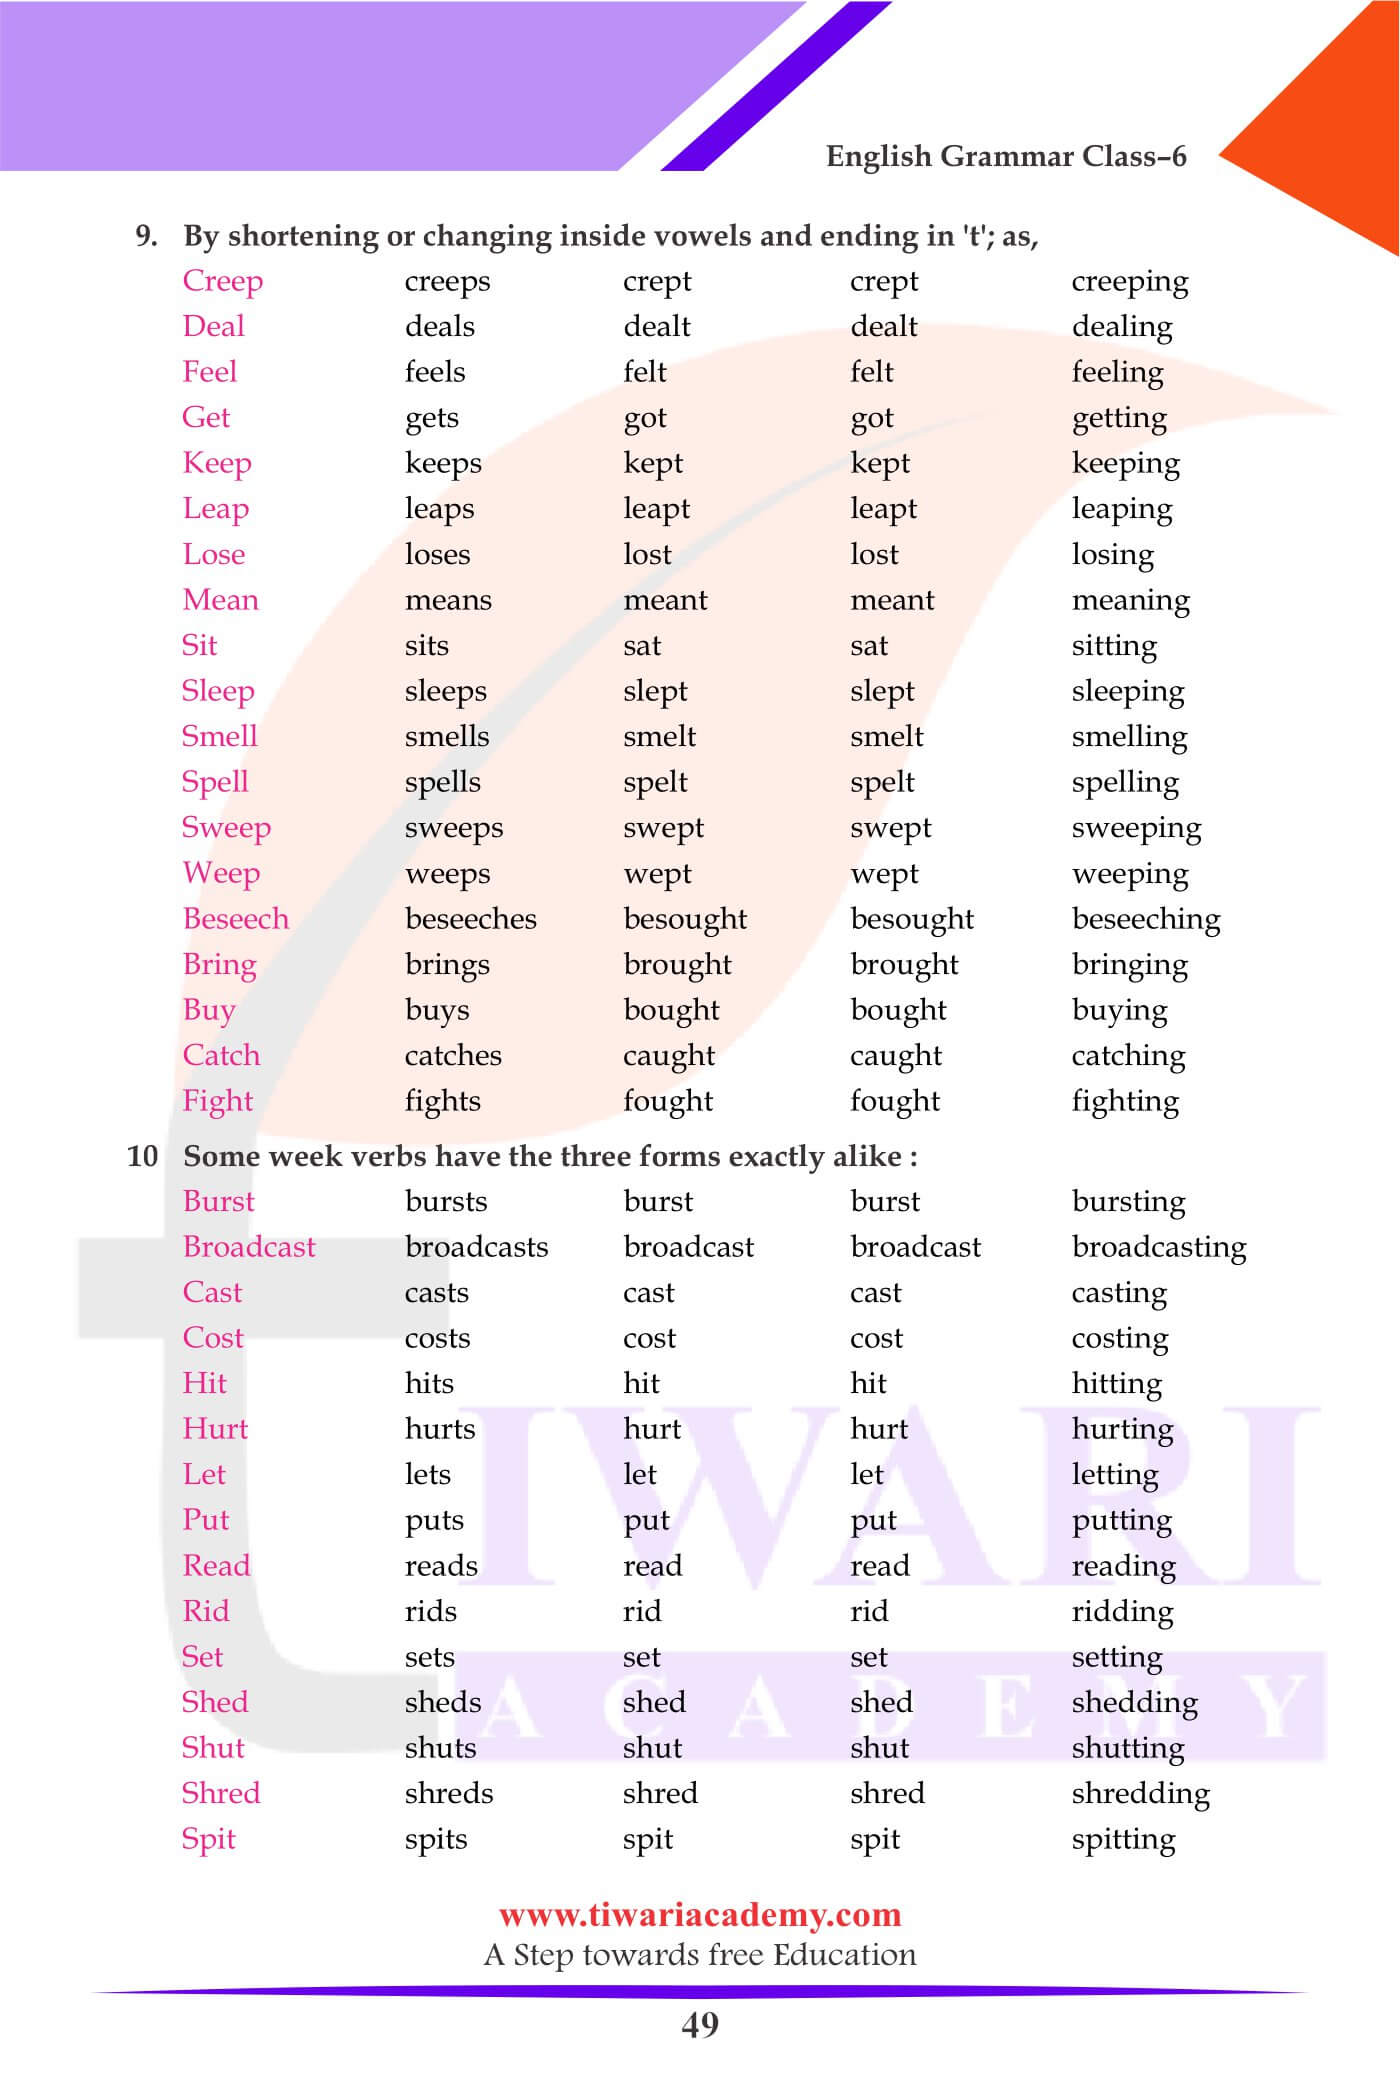 Class 6 English Grammar Chapter 11 Verbs and Their Forms PDF Video.